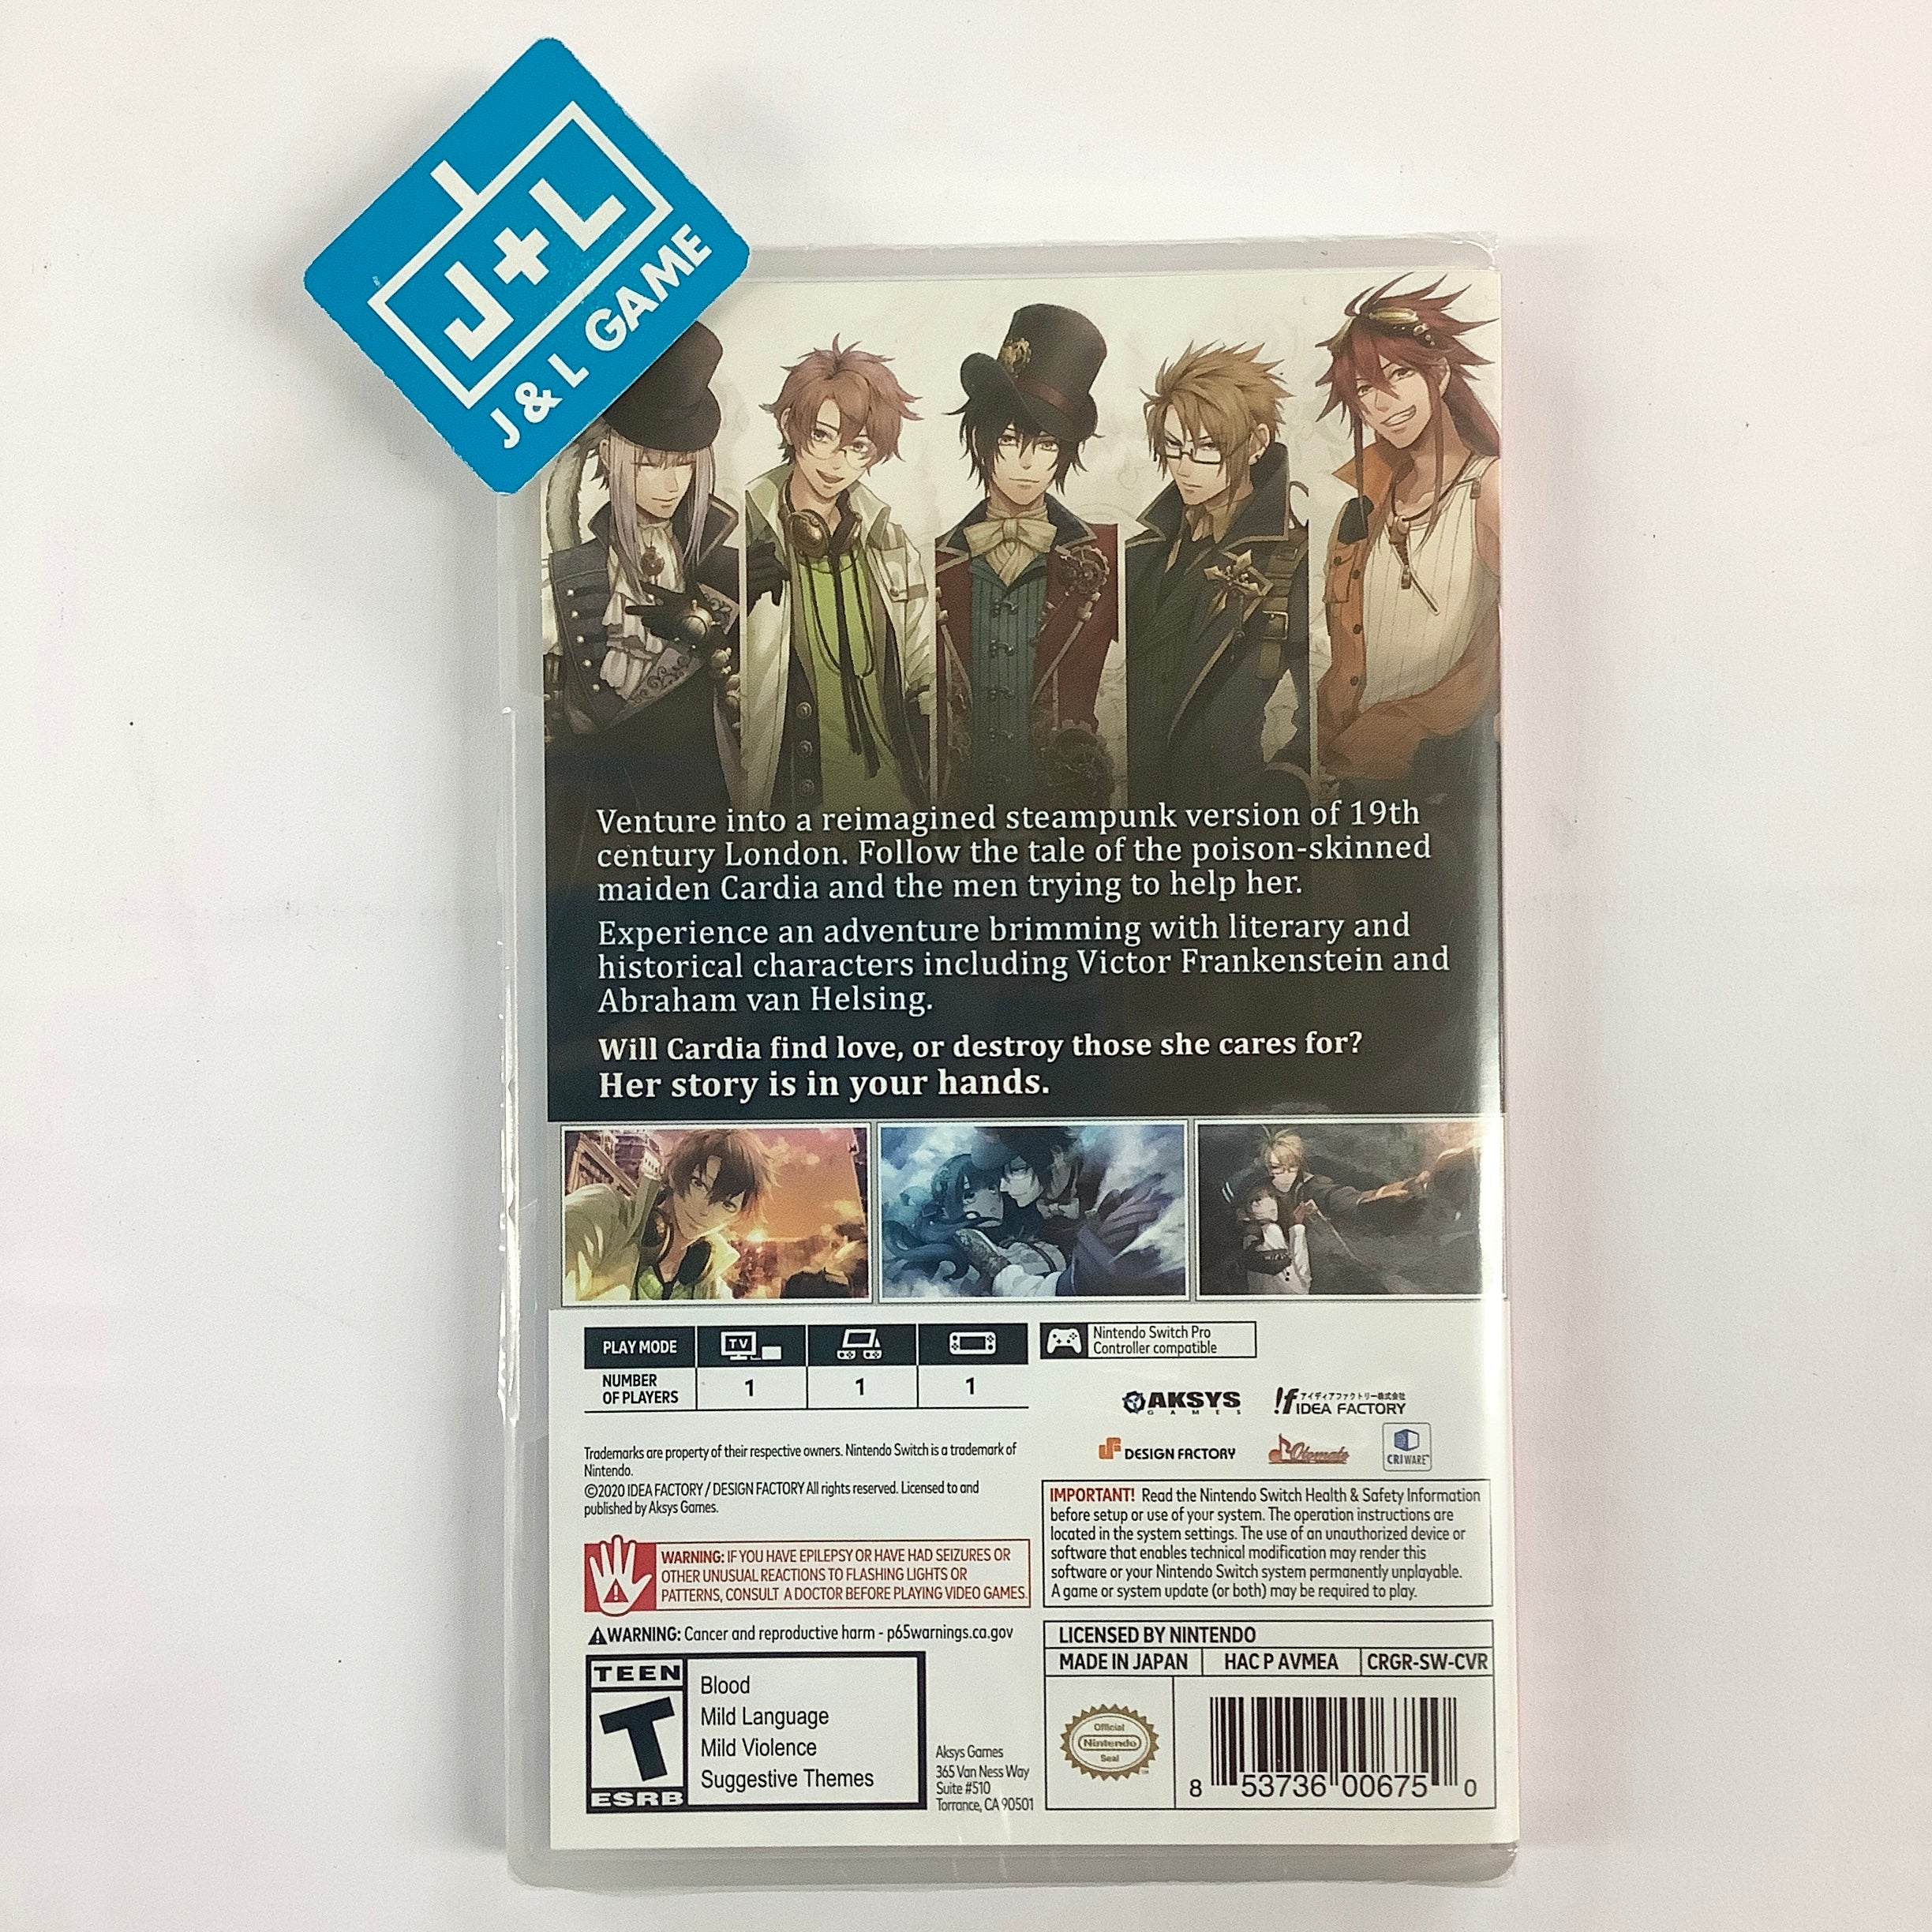 Code: Realize ~Guardian of Rebirth~ - (NSW) Nintendo Switch Video Games Aksys Games   